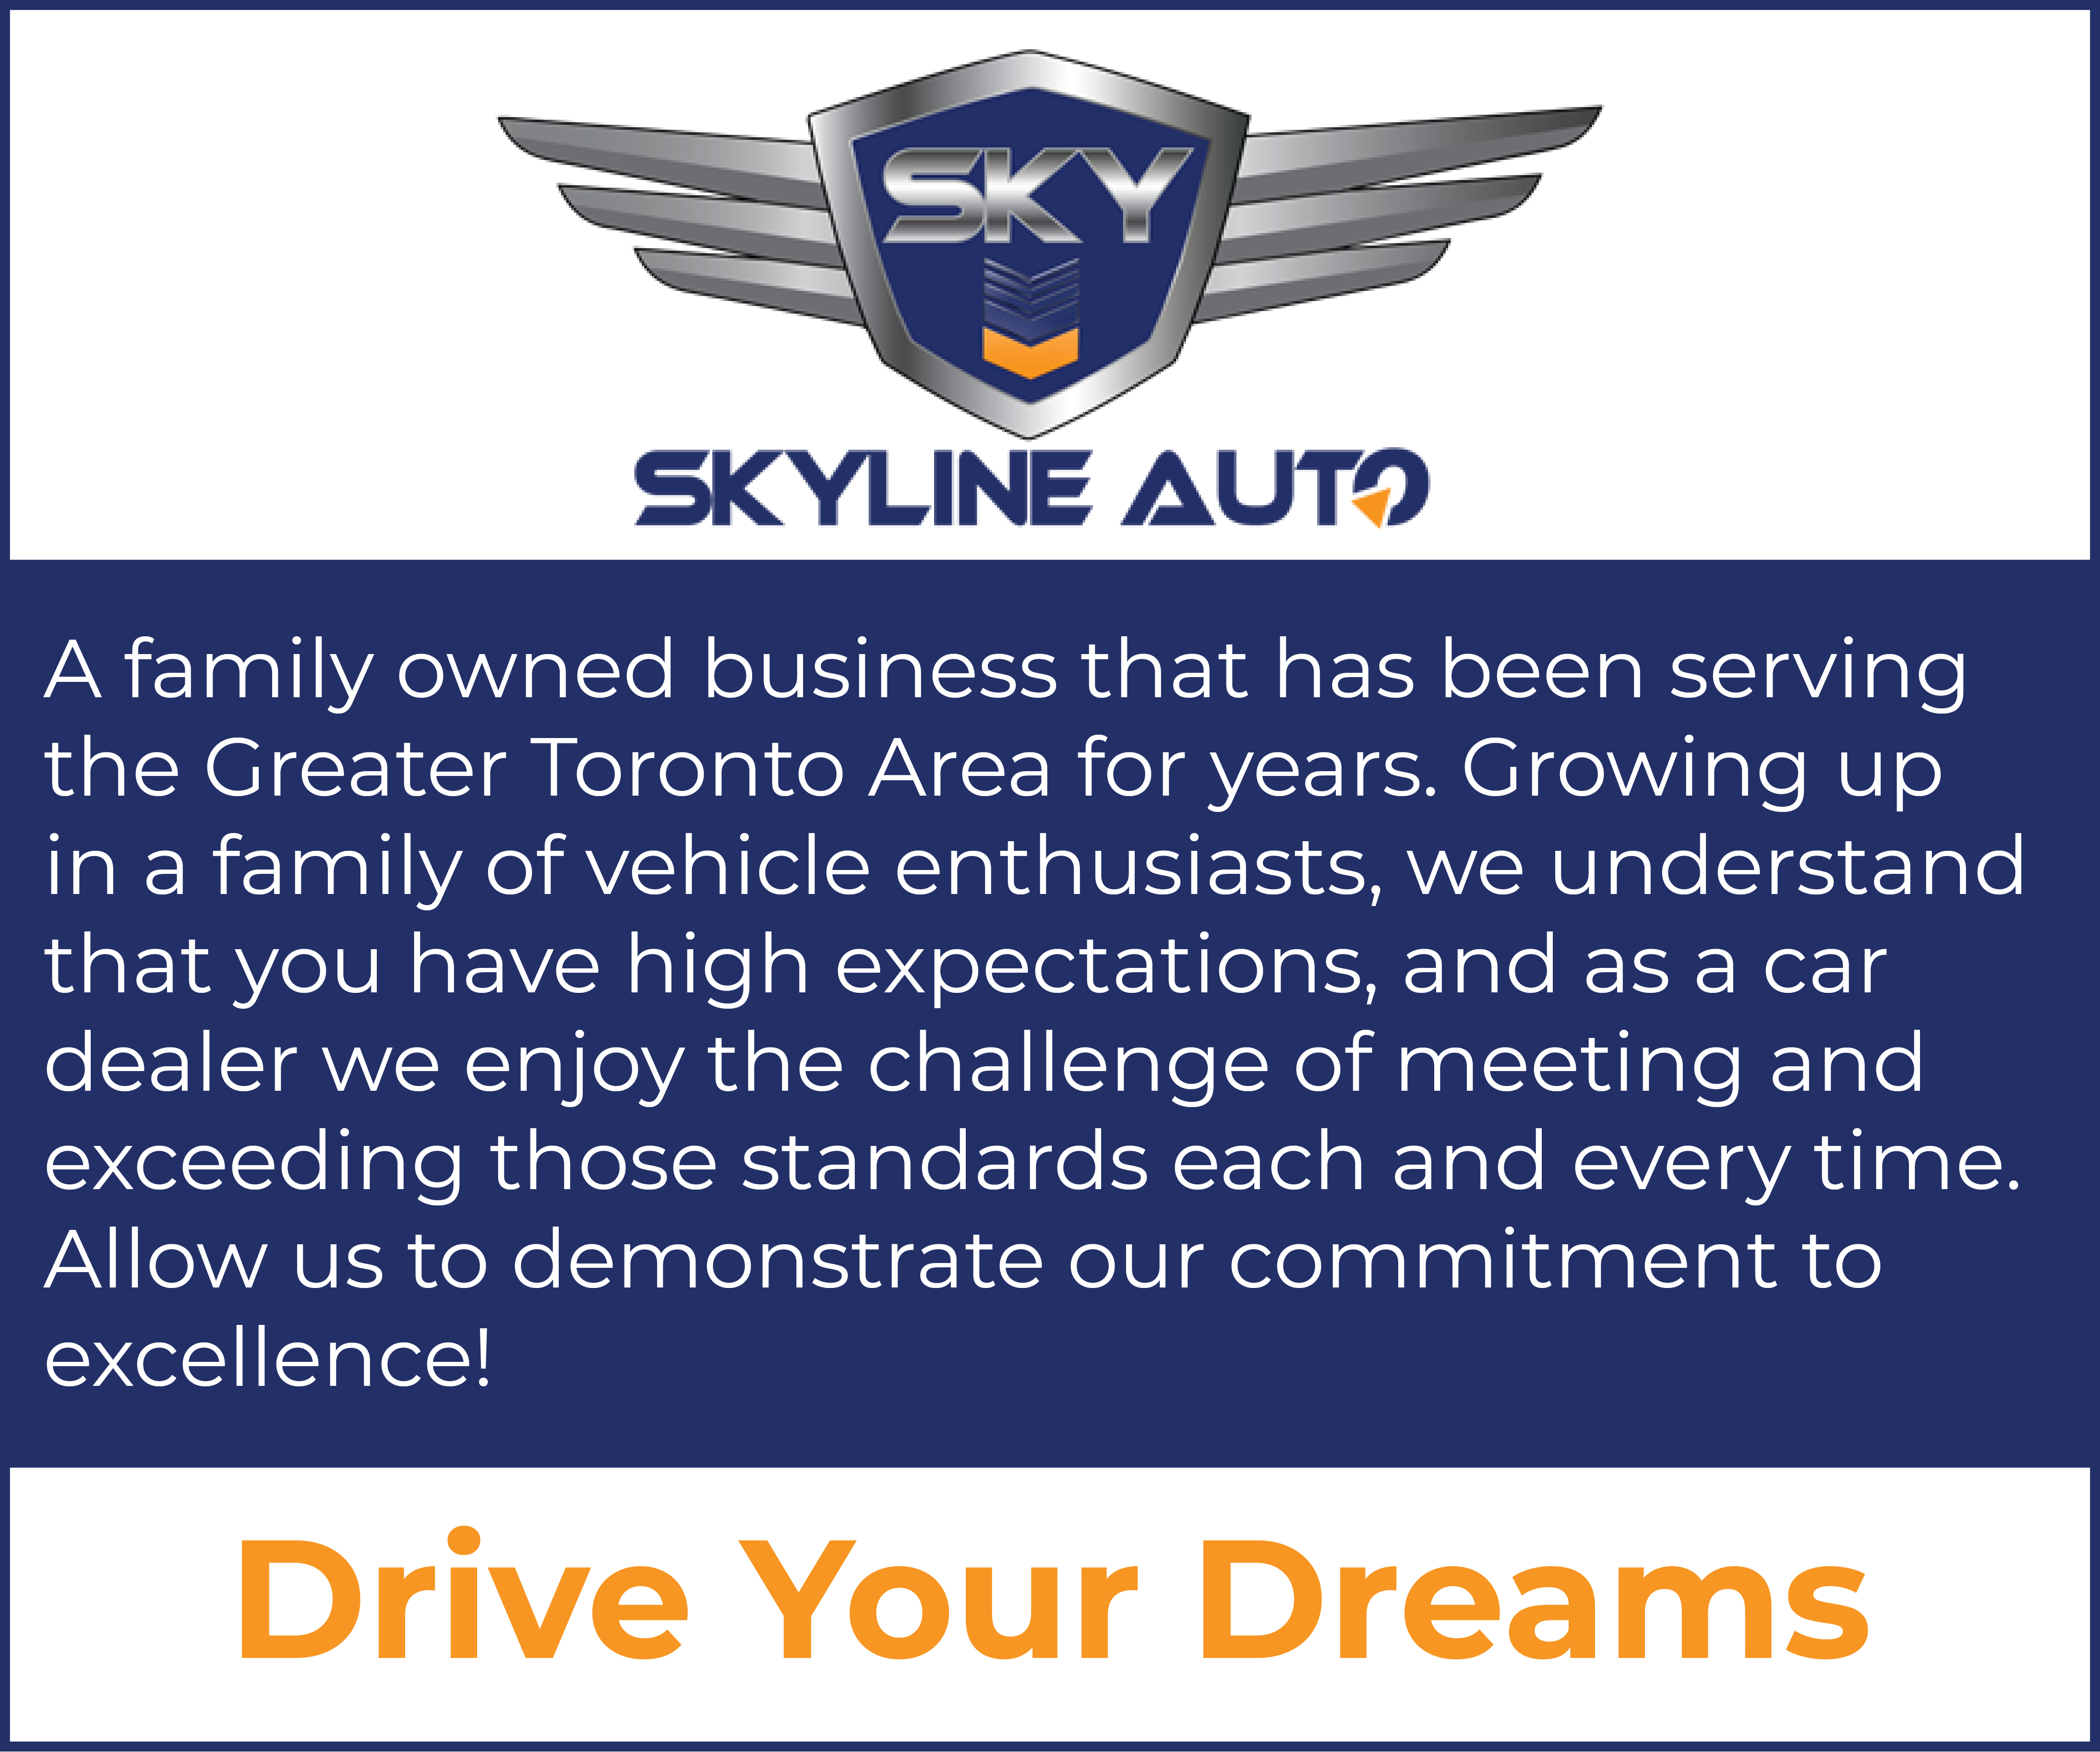 More from Skyline Automotive